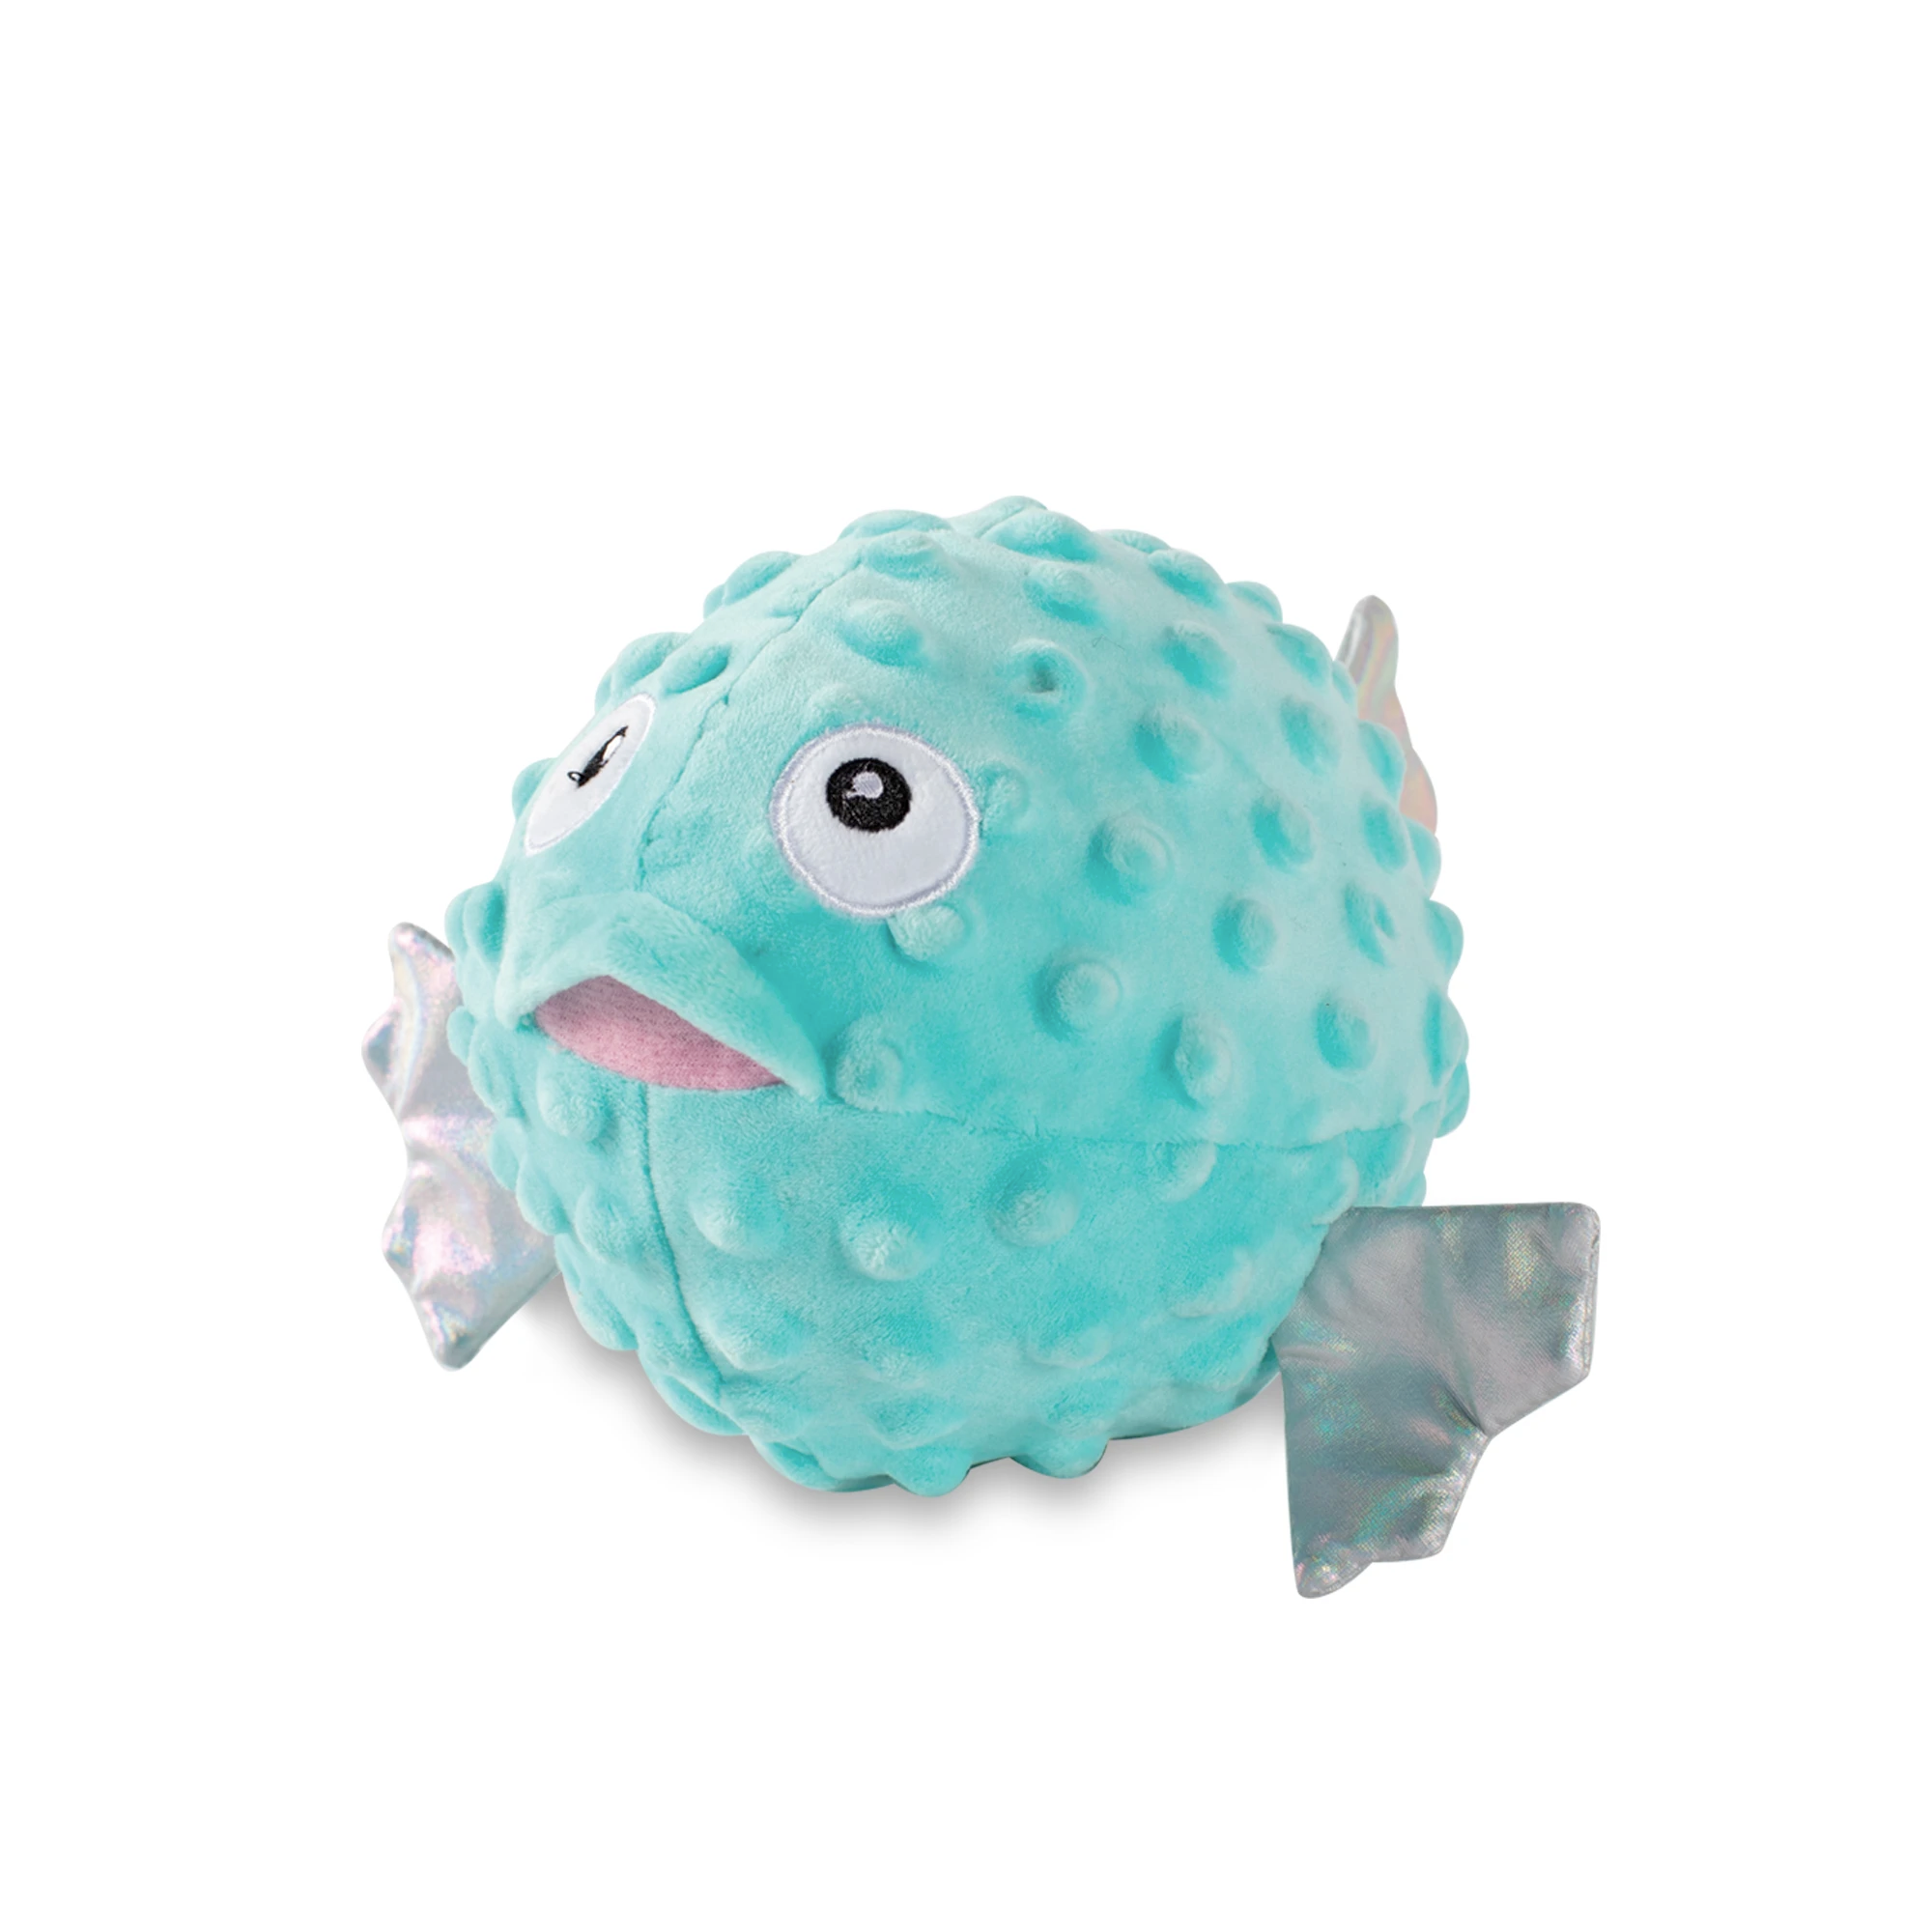 Puffed Up Puffer Fish, Squeaky Plush Dog toy